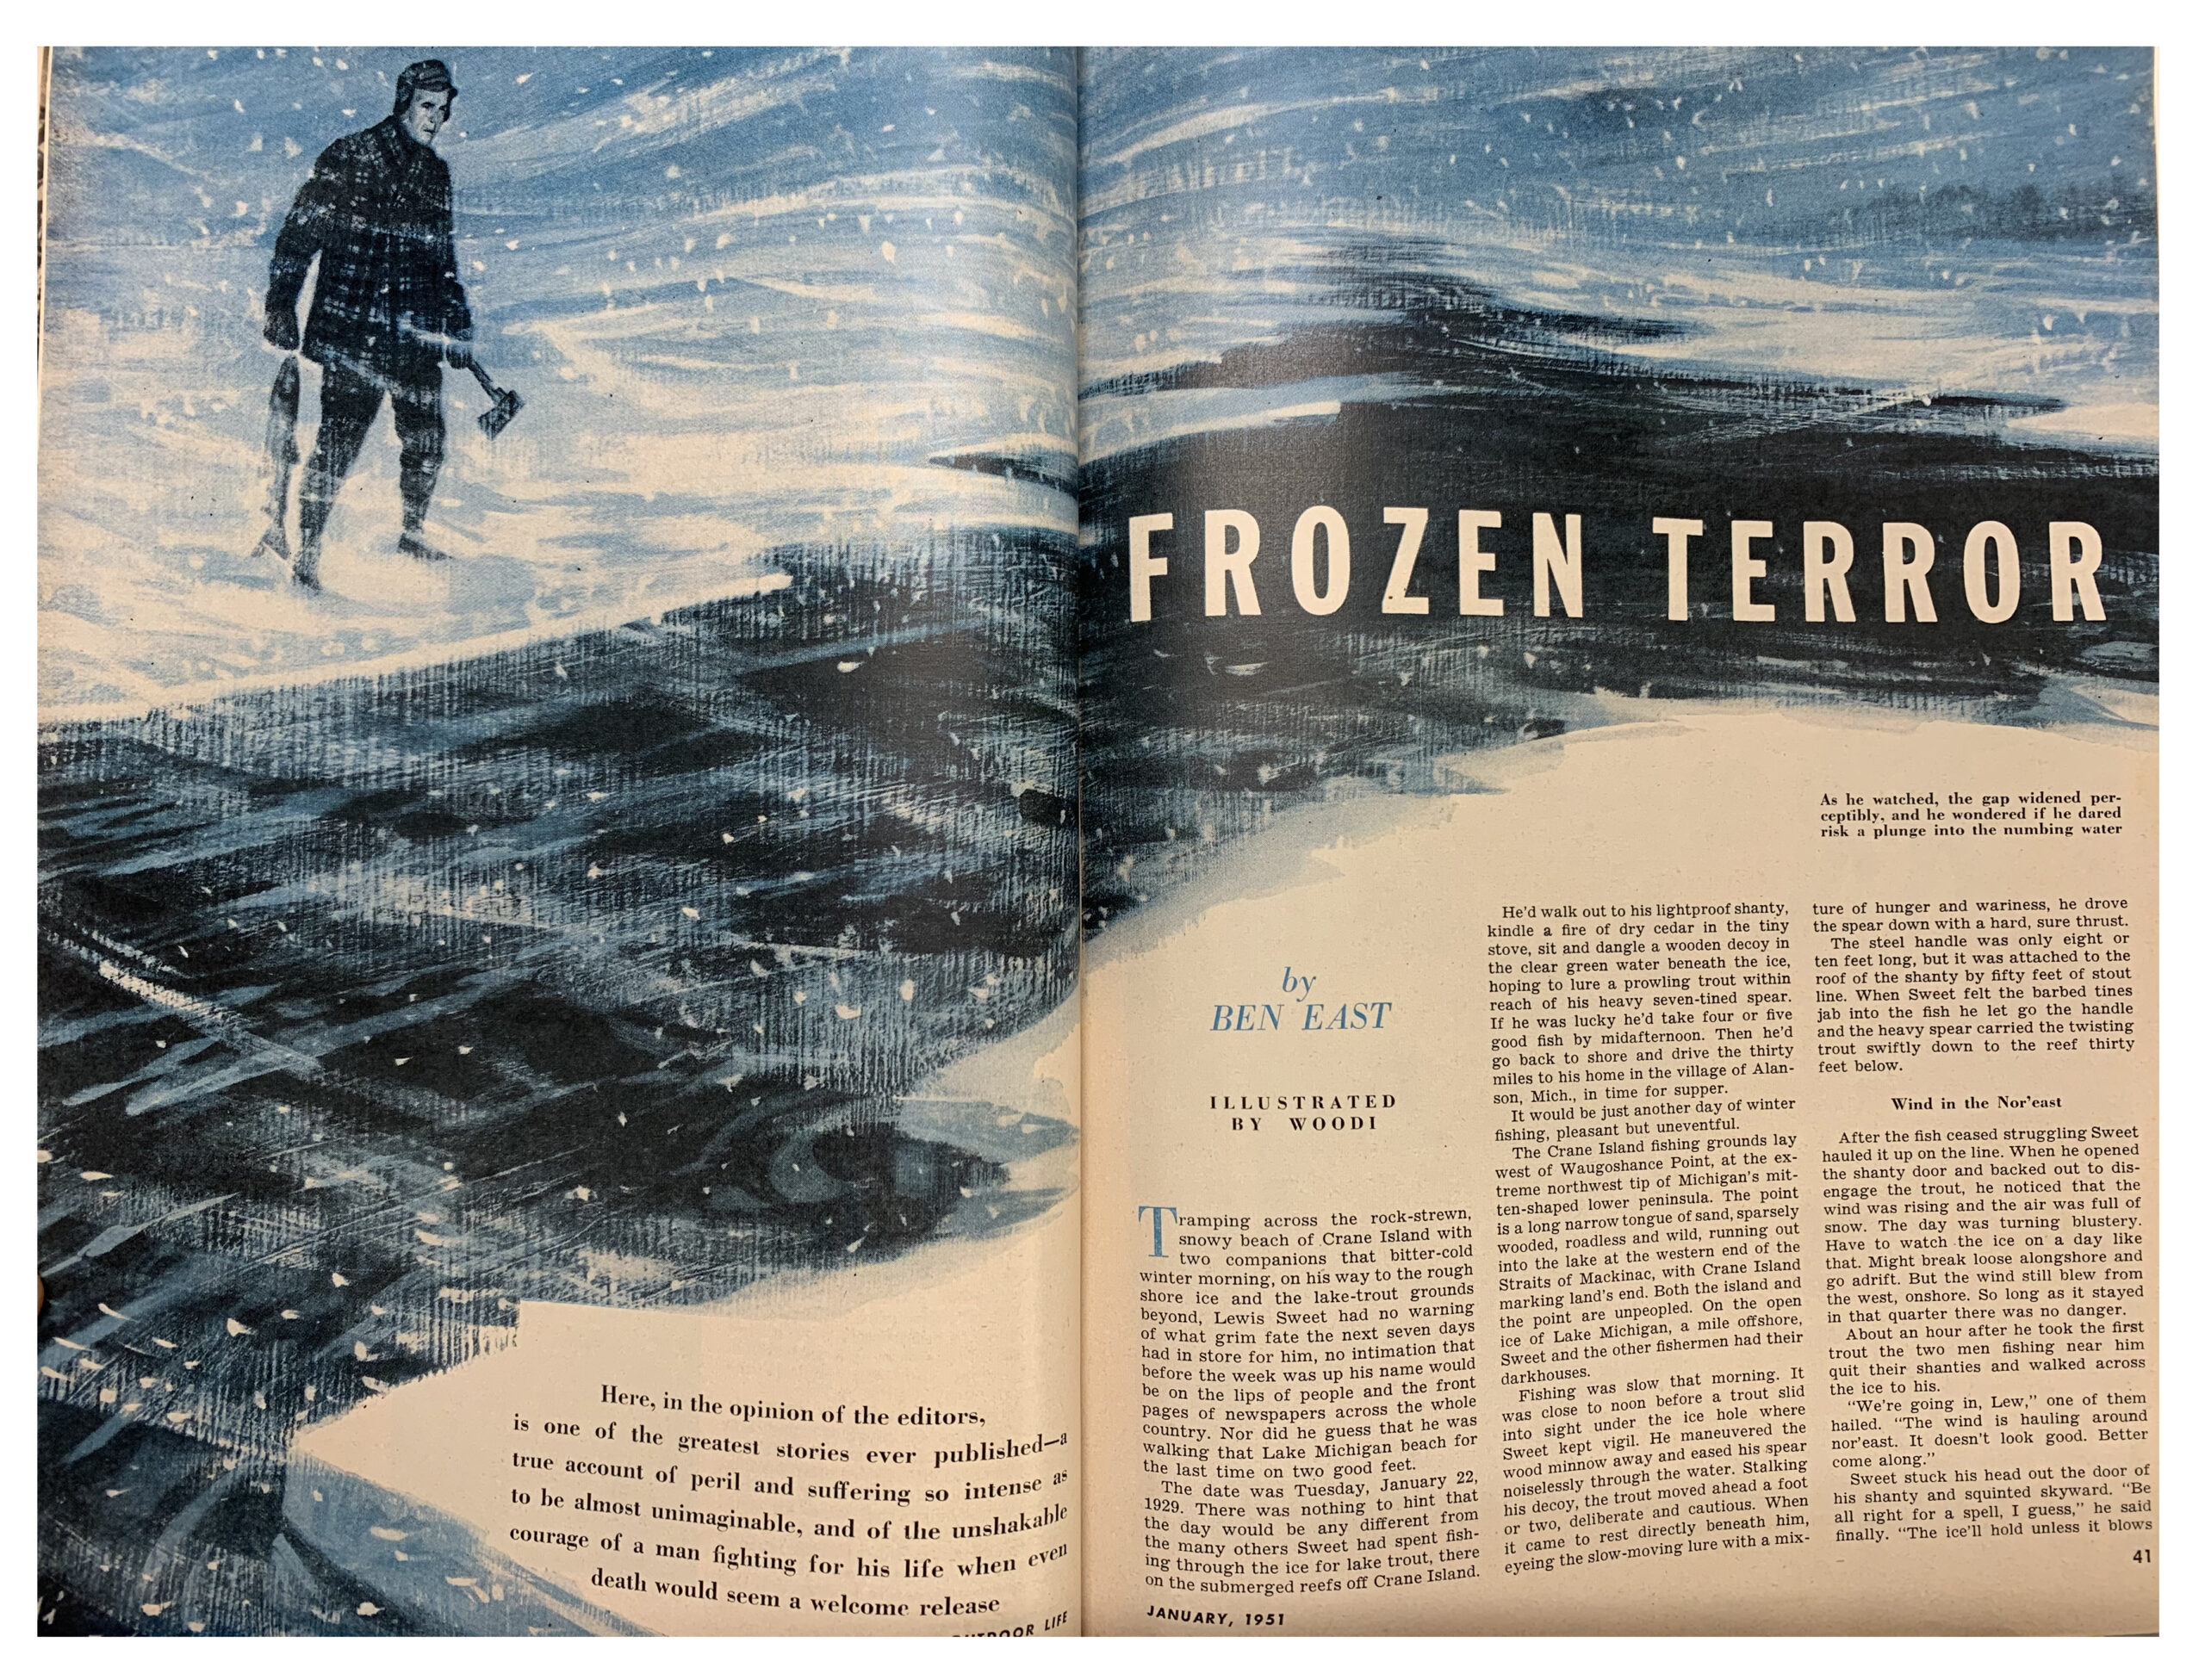 An ice fisherman watches the ice break off in the January 1951 Outdoor Life story, Frozen Terror.